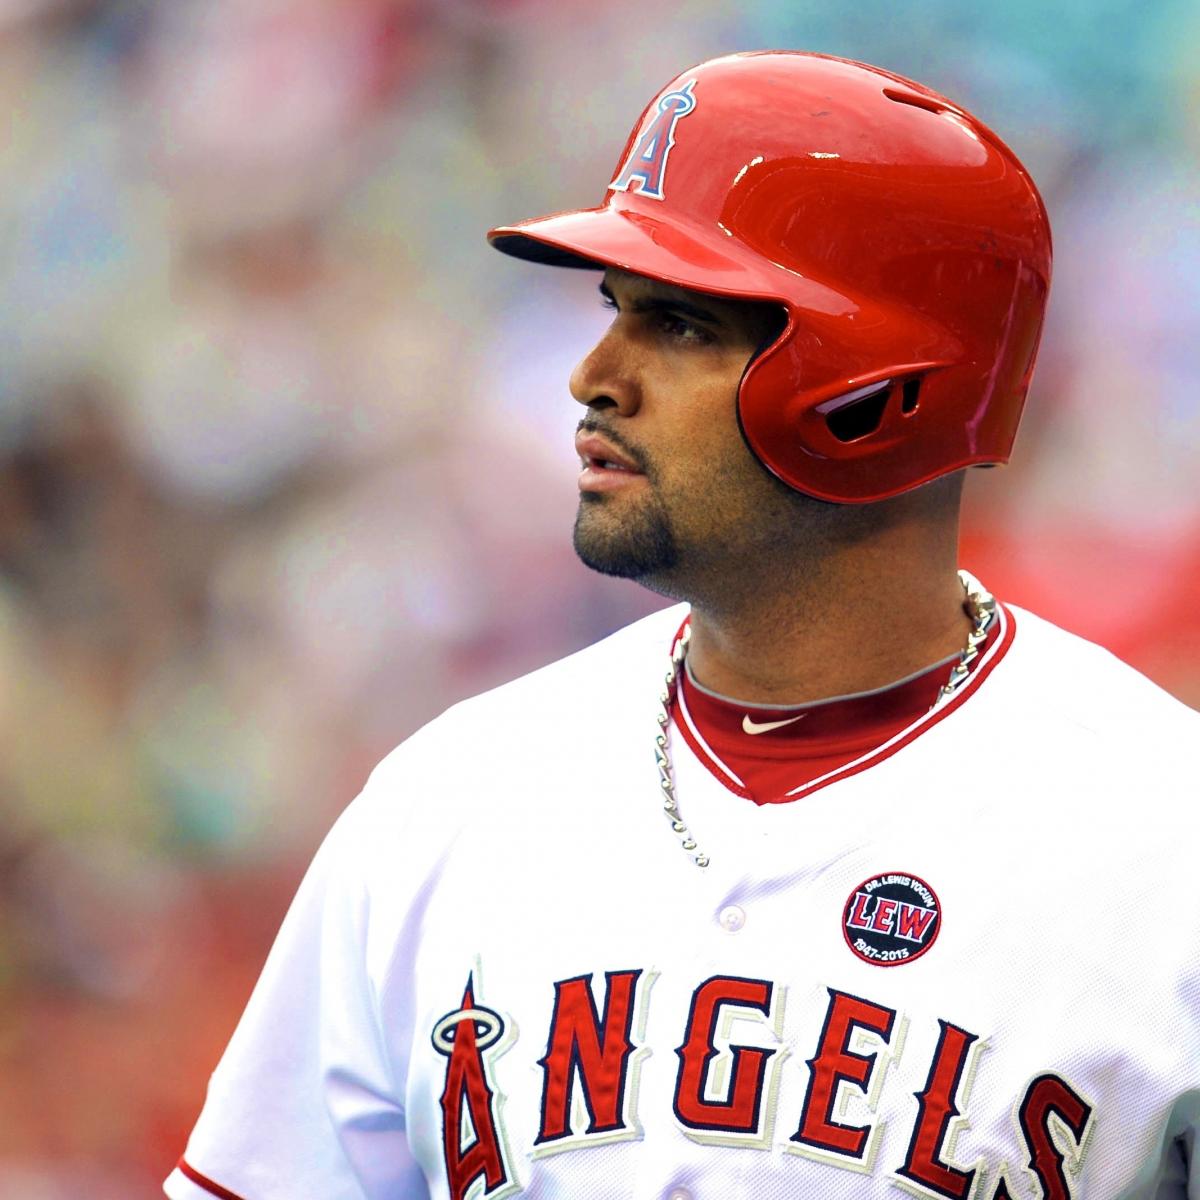 Jack Clark stands by claim that Albert Pujols took steroids - NBC Sports